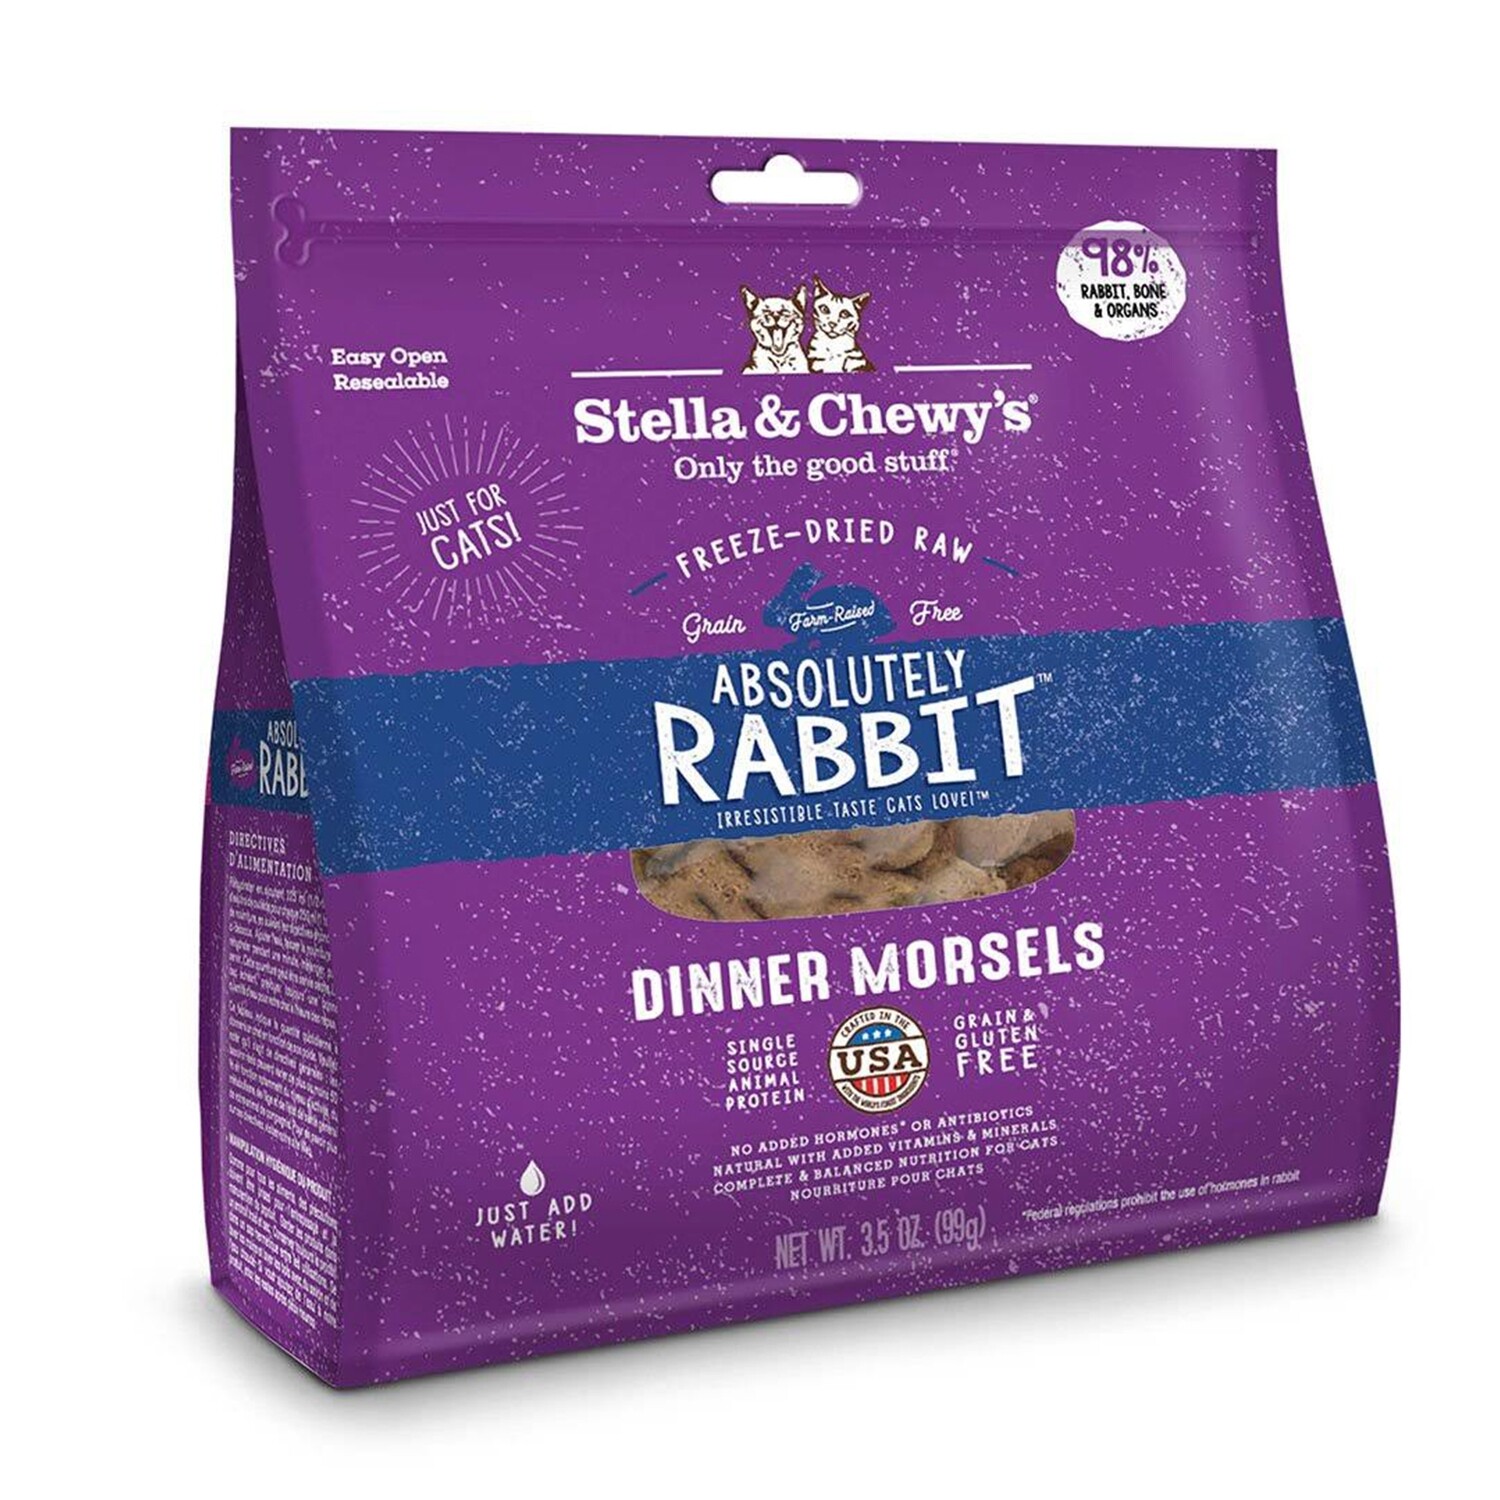 Stella&Chewy's Rabbit Freeze-Dried Raw Dinner Morsels